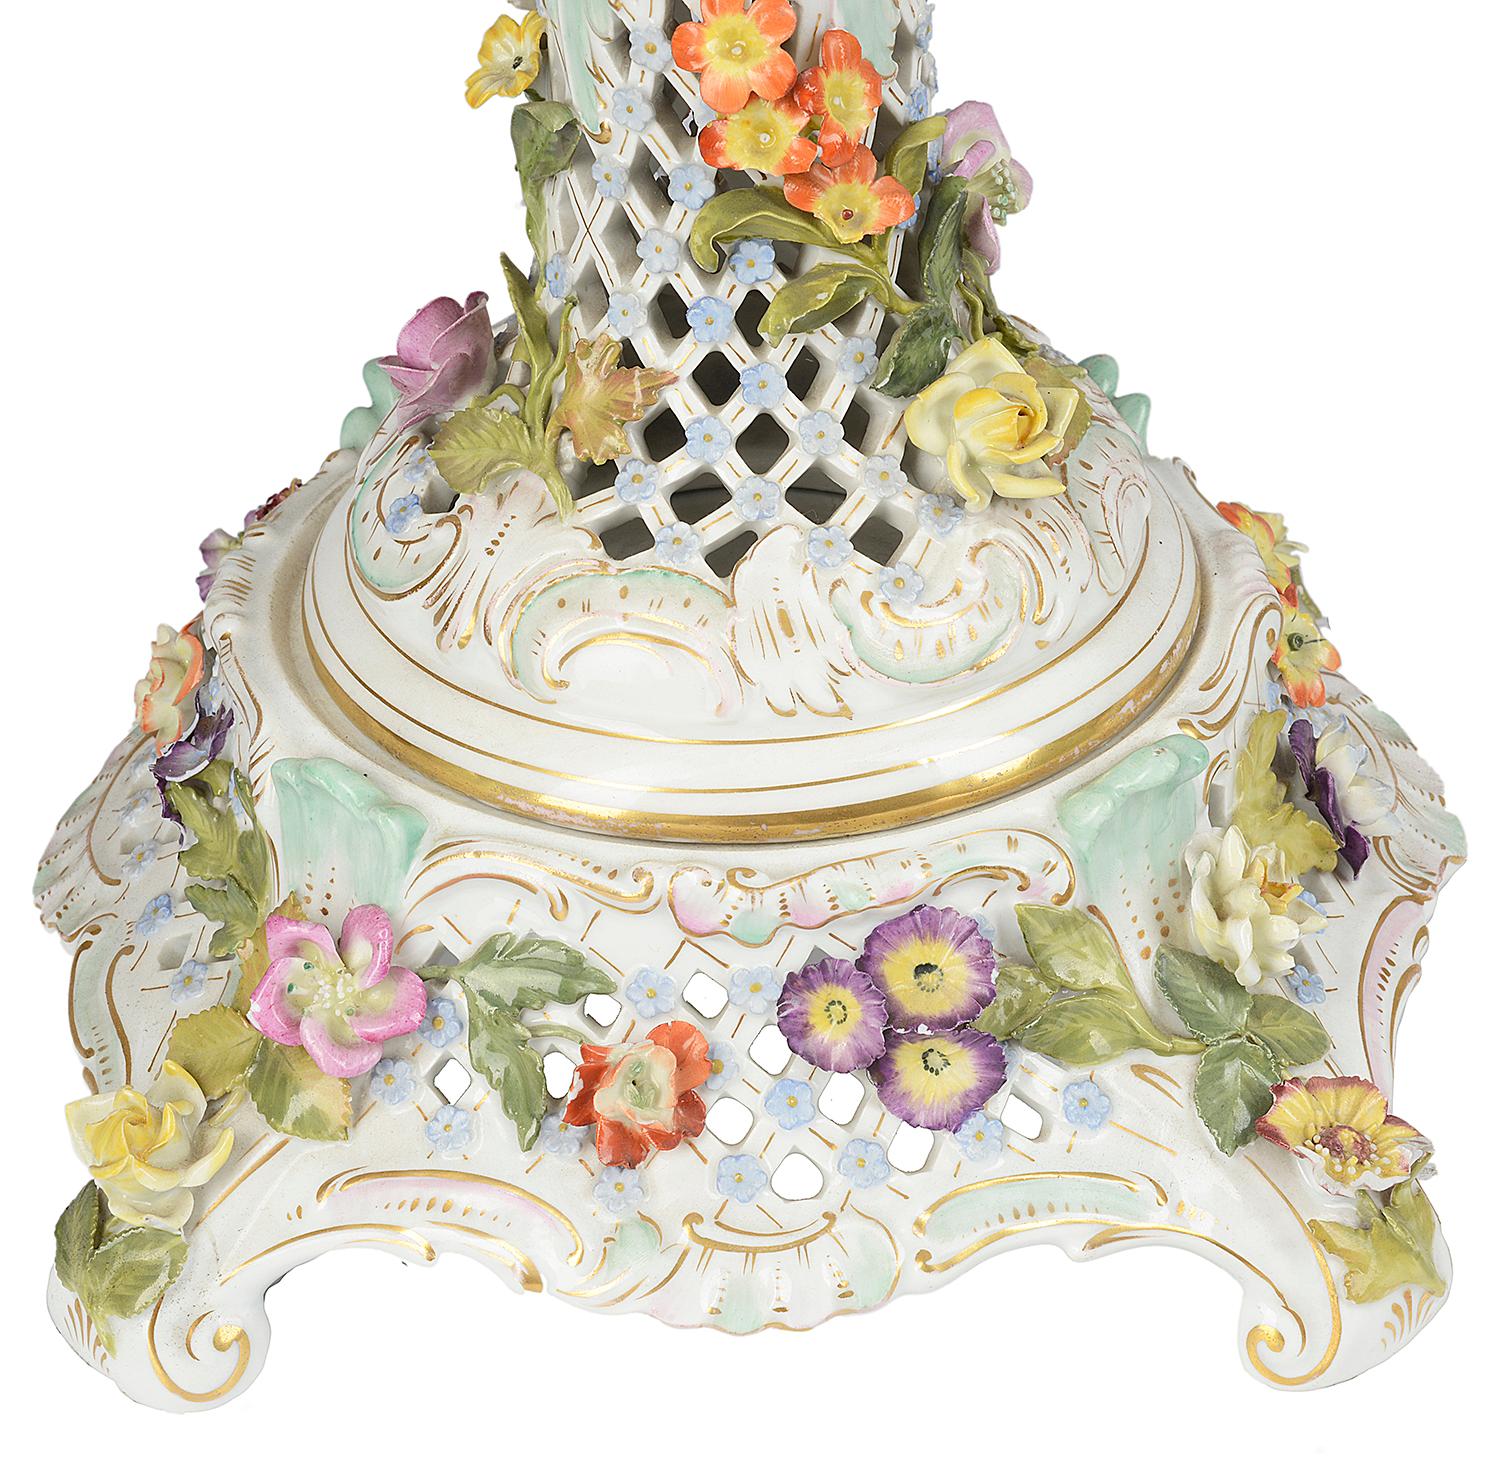 An impressive pair of Dresden style porcelain lidded comports, each with cherubs seated or climbing around the lids, crowns to each with family crests, beautiful colored flowers surrounding the vases and handles. Romantic scenes painted and pieced